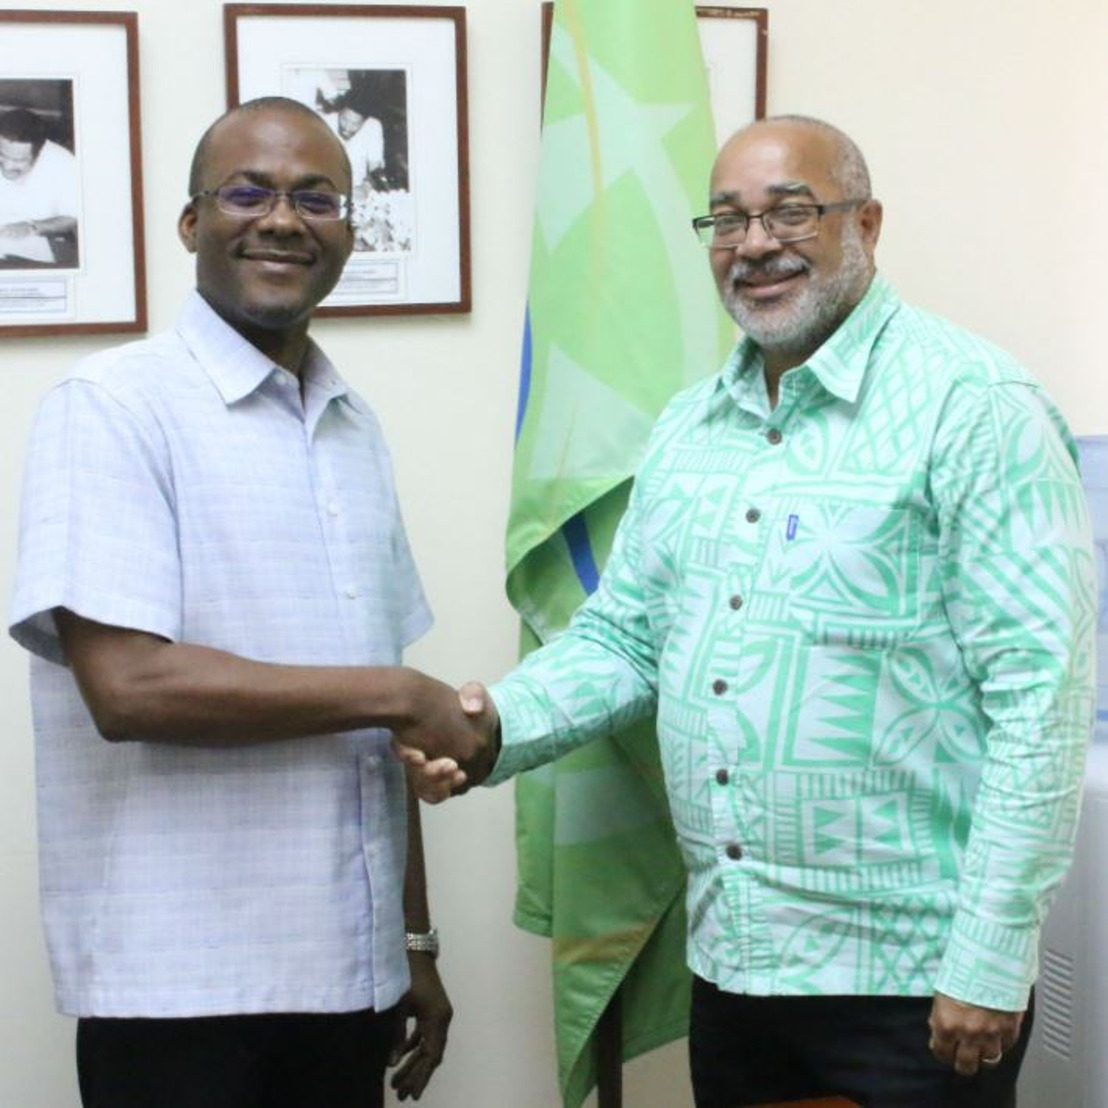 OECS and ARIN Extend Cooperation to Strengthen Caribbean Information and Communication Technology